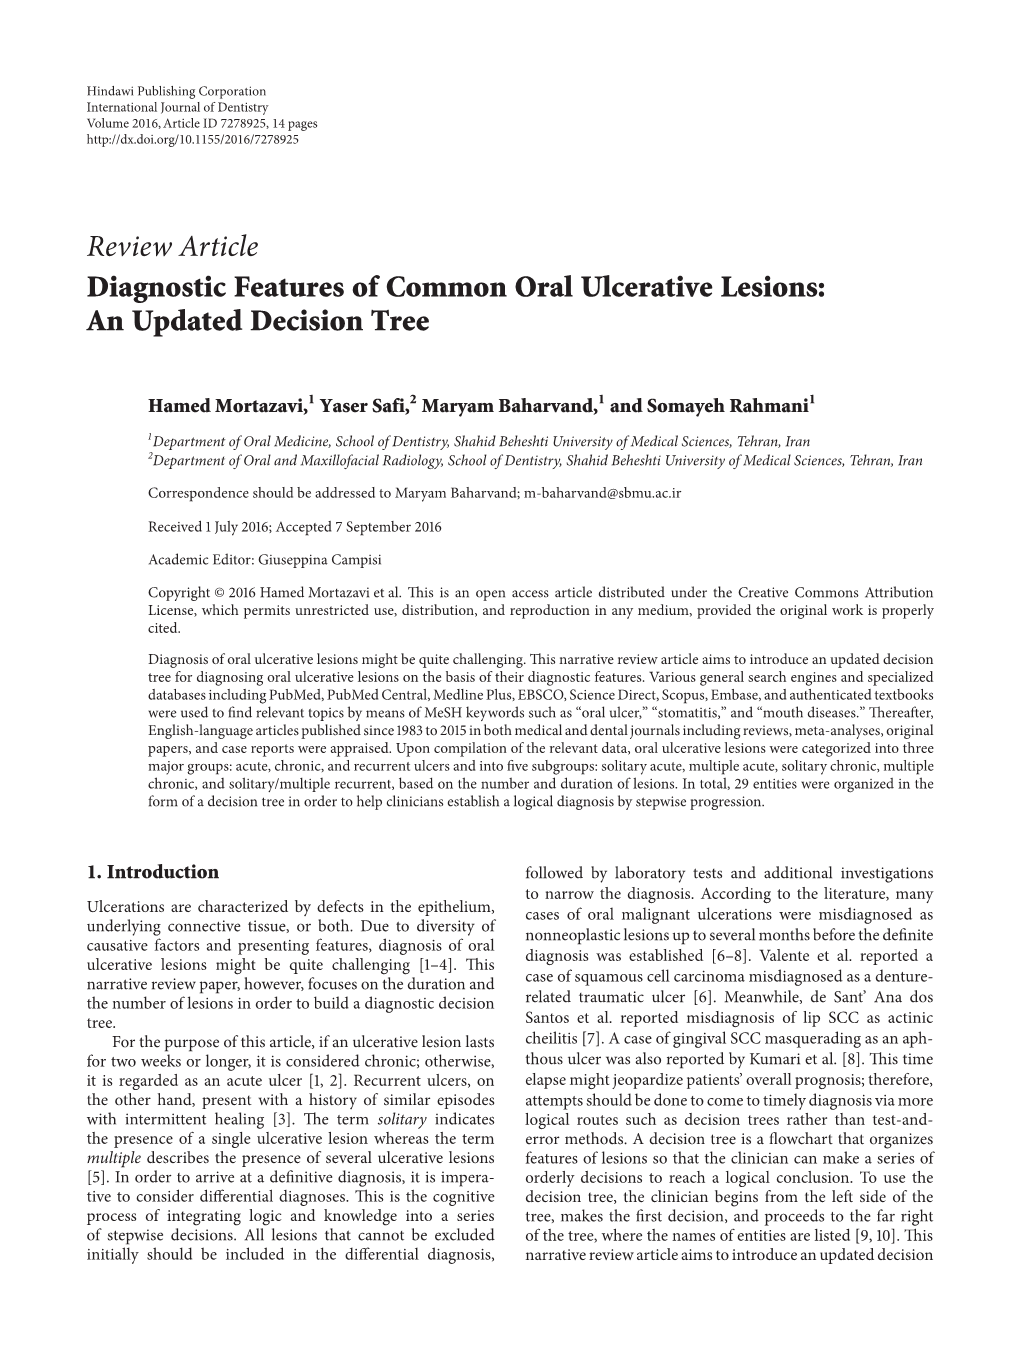 Review Article Diagnostic Features of Common Oral Ulcerative Lesions: an Updated Decision Tree